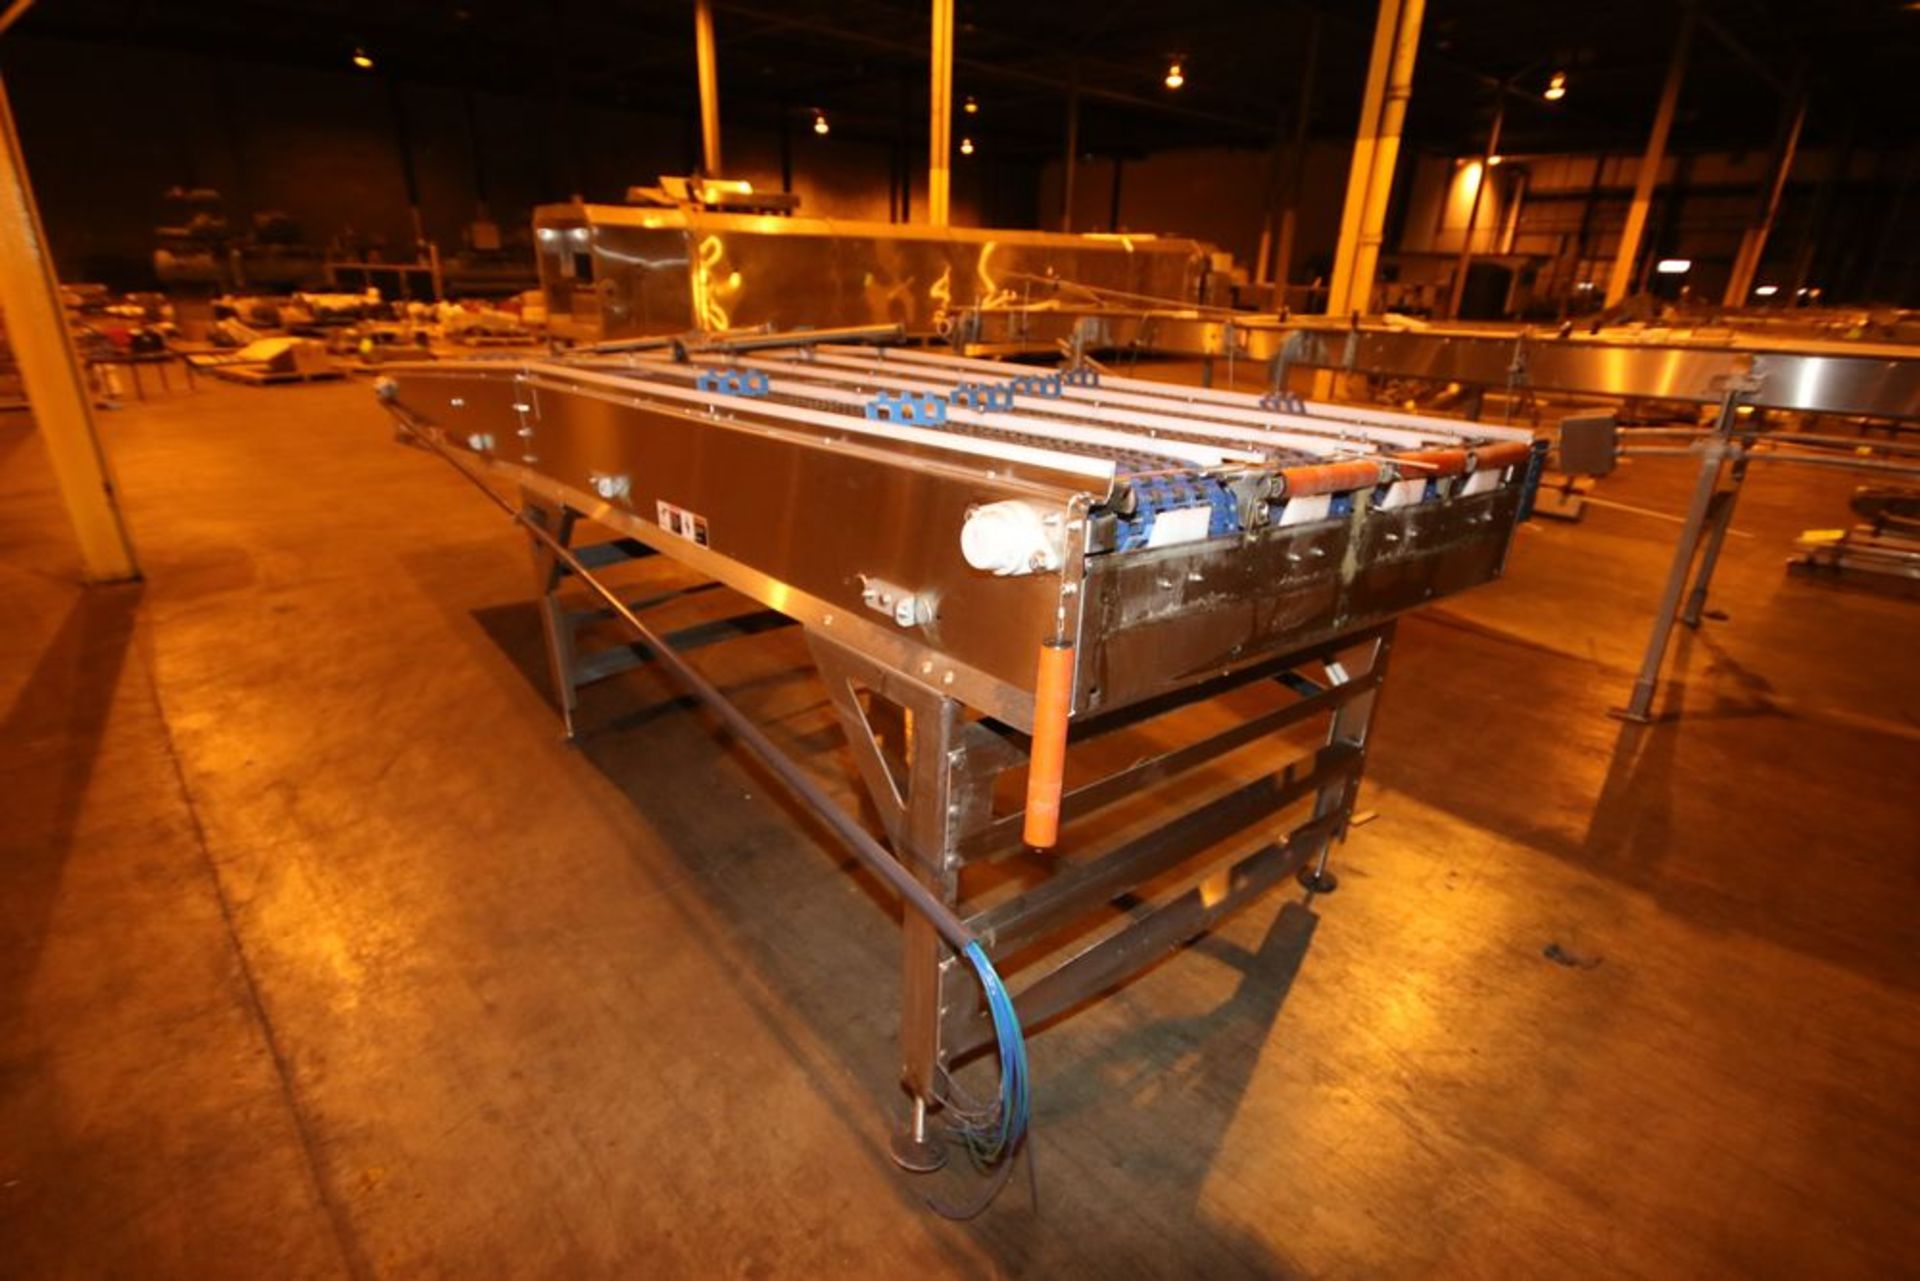 2012 Intralox 4-Lane S/S Conveyor, with SEW Drive, Lane Width: 12" W, Overall Dims.: Aprox. 14' L - Image 3 of 6